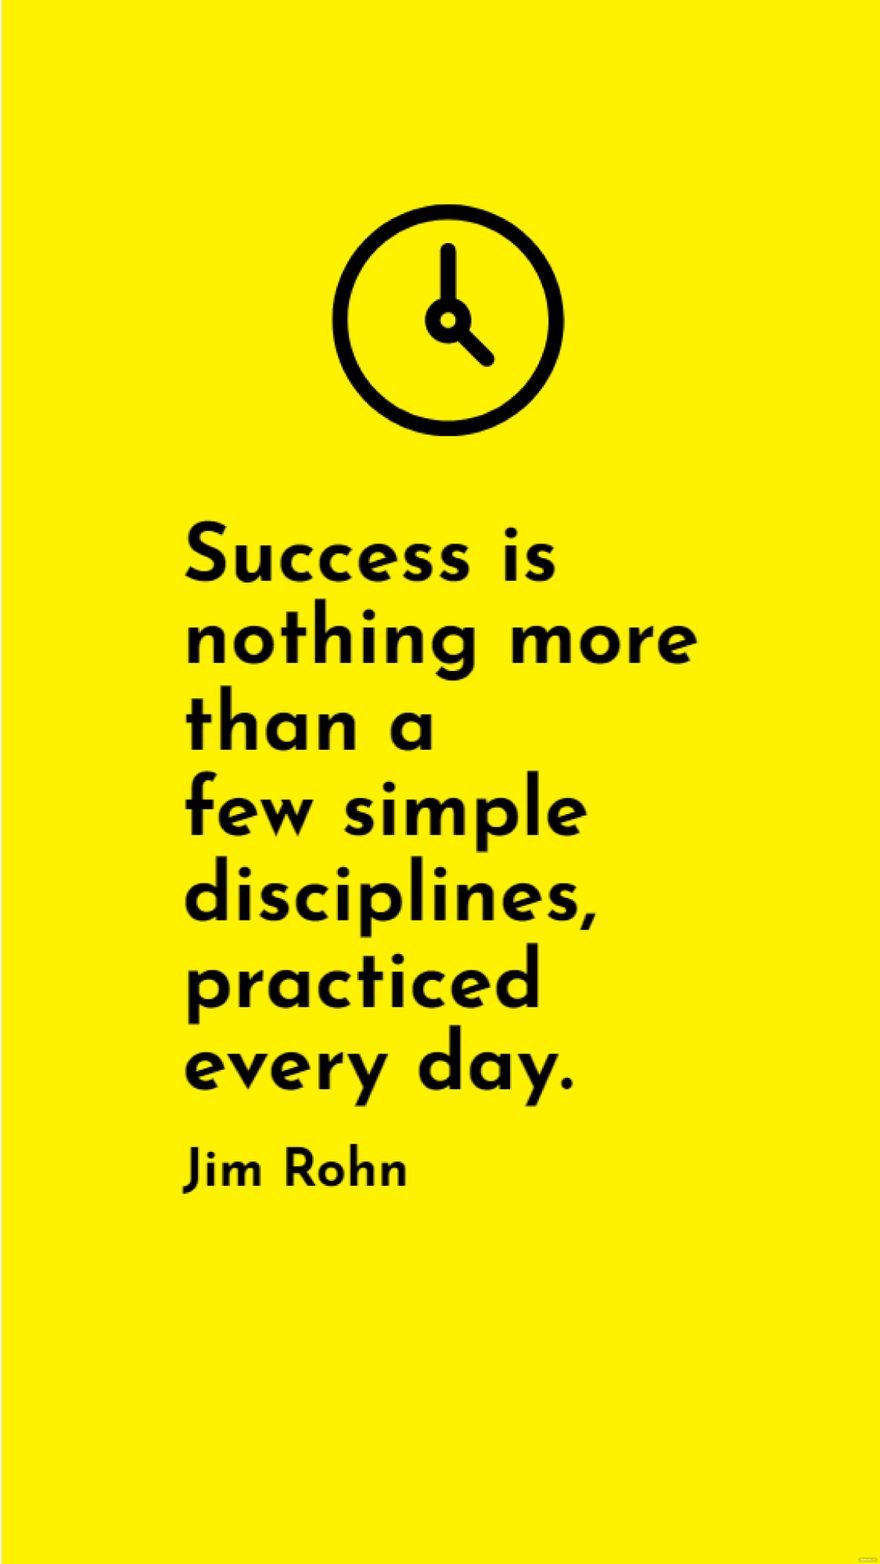 Jim Rohn - Success is nothing more than a few simple disciplines, practiced every day.